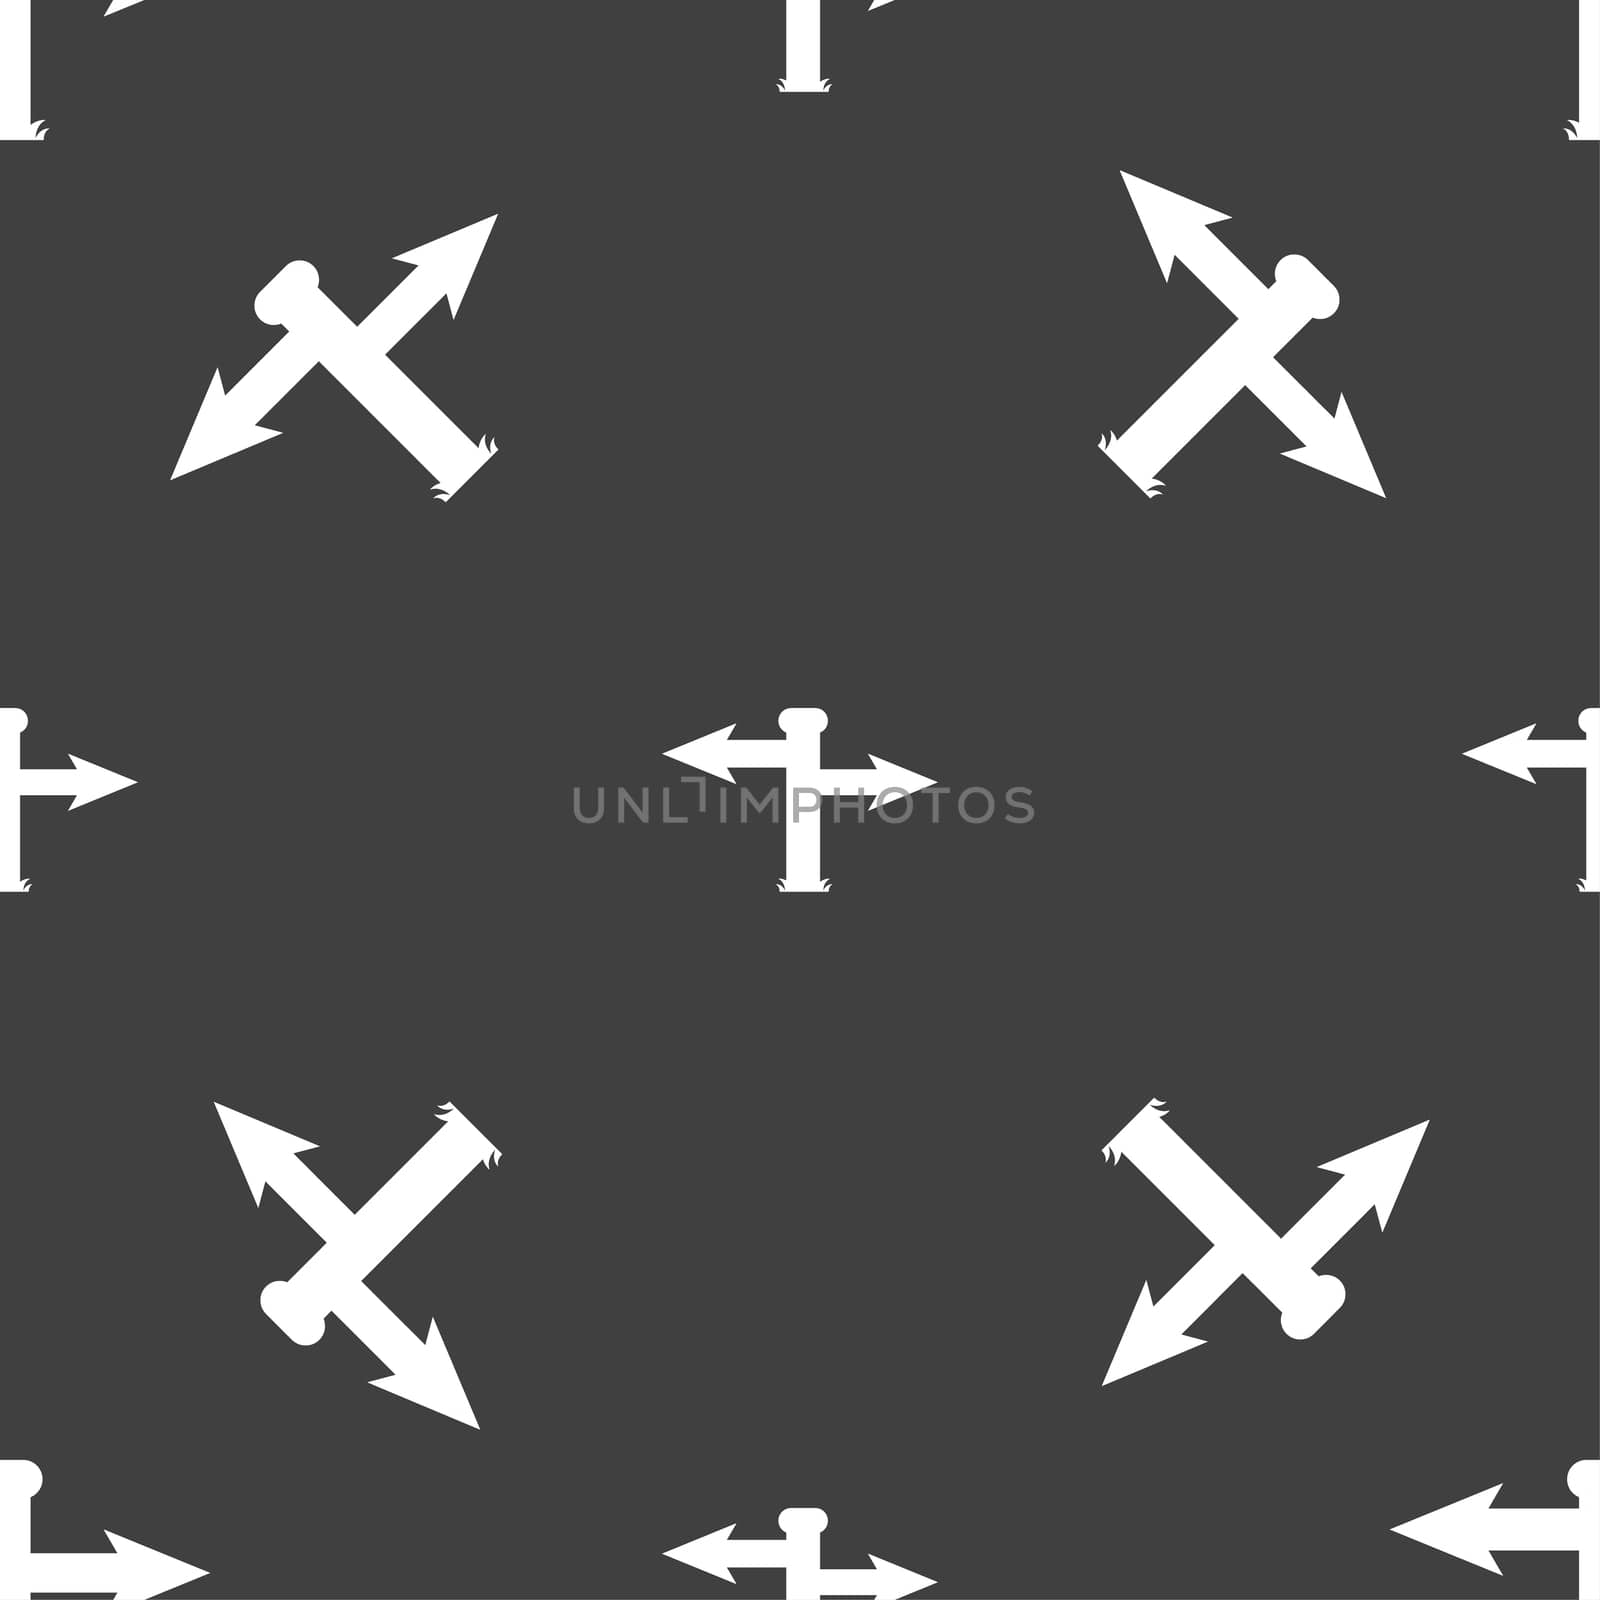 Blank Road Sign icon sign. Seamless pattern on a gray background. illustration